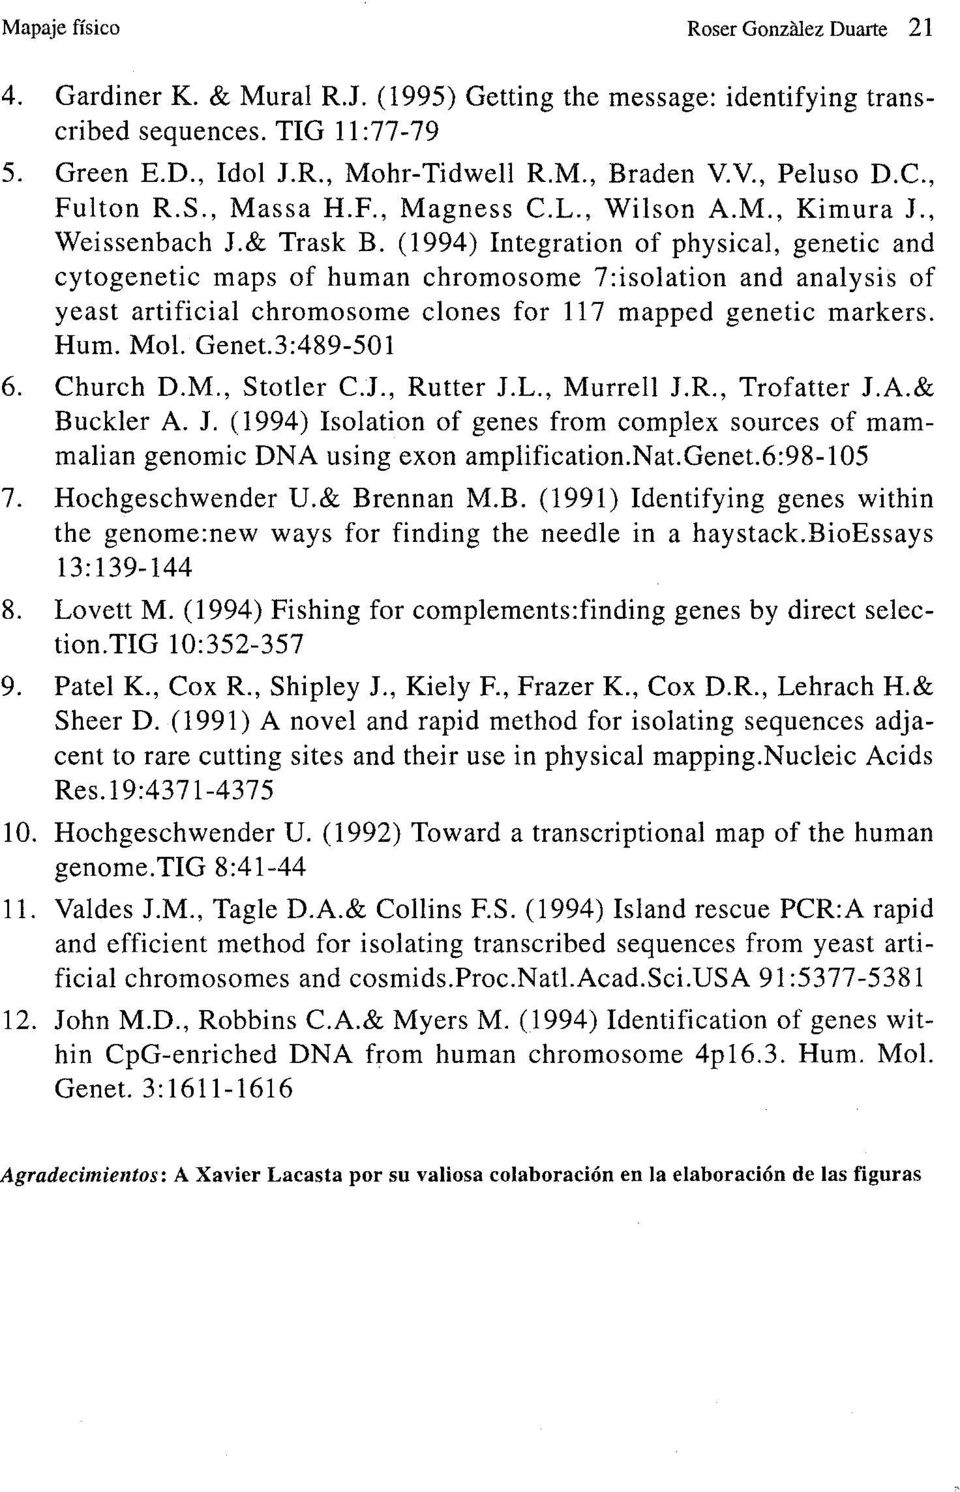 (1994) Integration of physical, genetic and cytogenetic maps of human chromosome 7:isolation and analysis of yeast artificial chromosome clones for 117 mapped genetic markers. Hum. Mol. Genet.